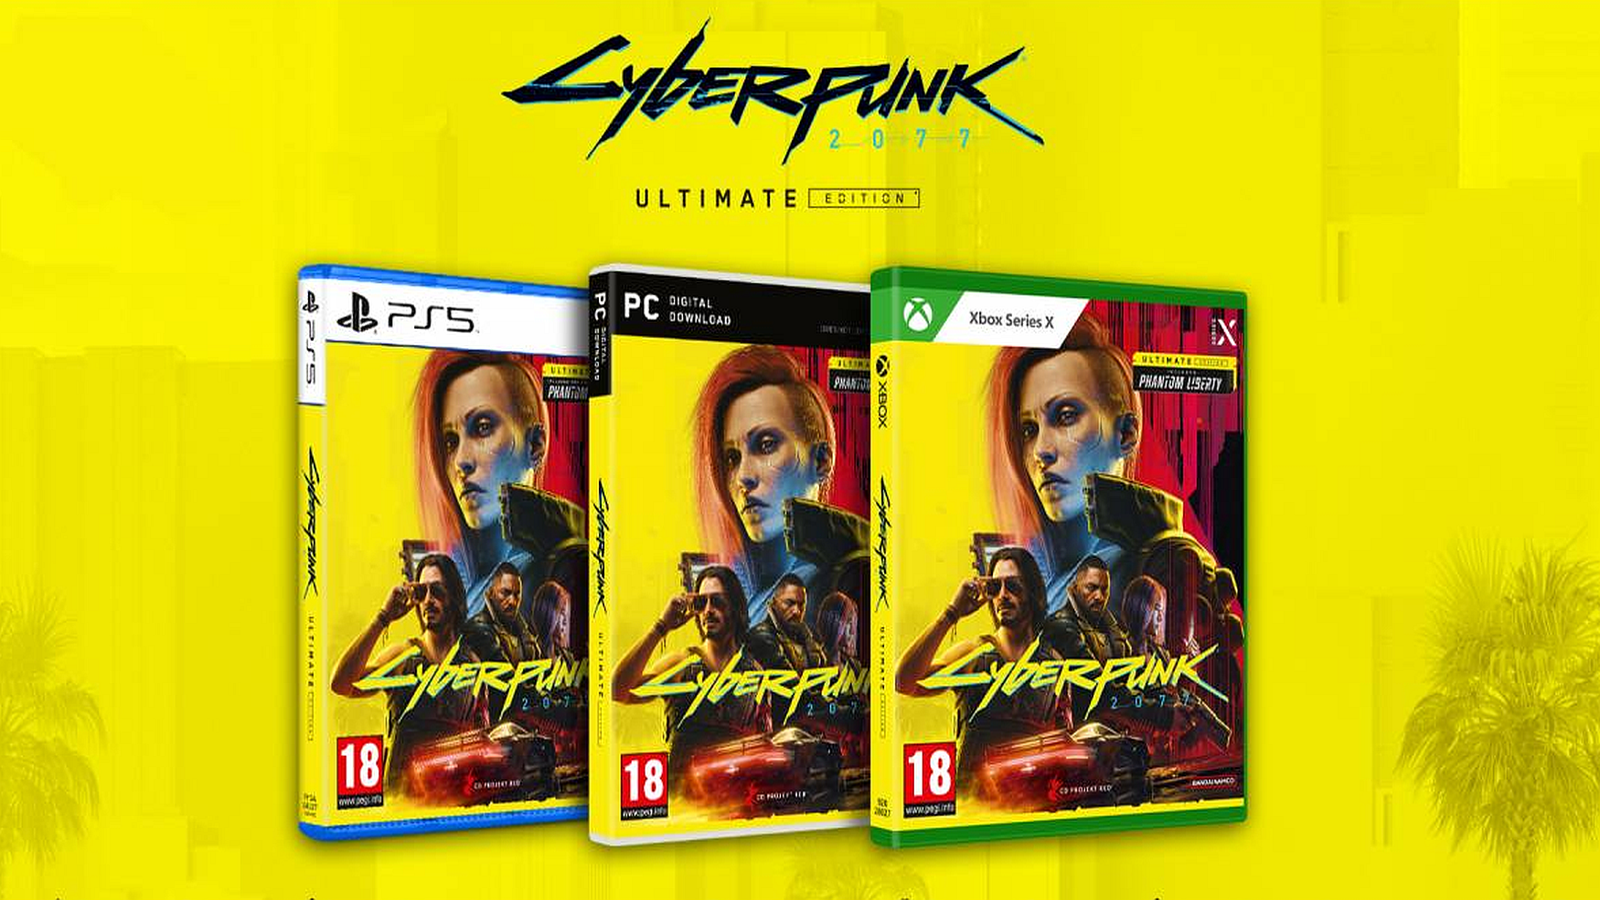 Cyberpunk 2077 on X: Remember, chooms! Register for MY REWARDS